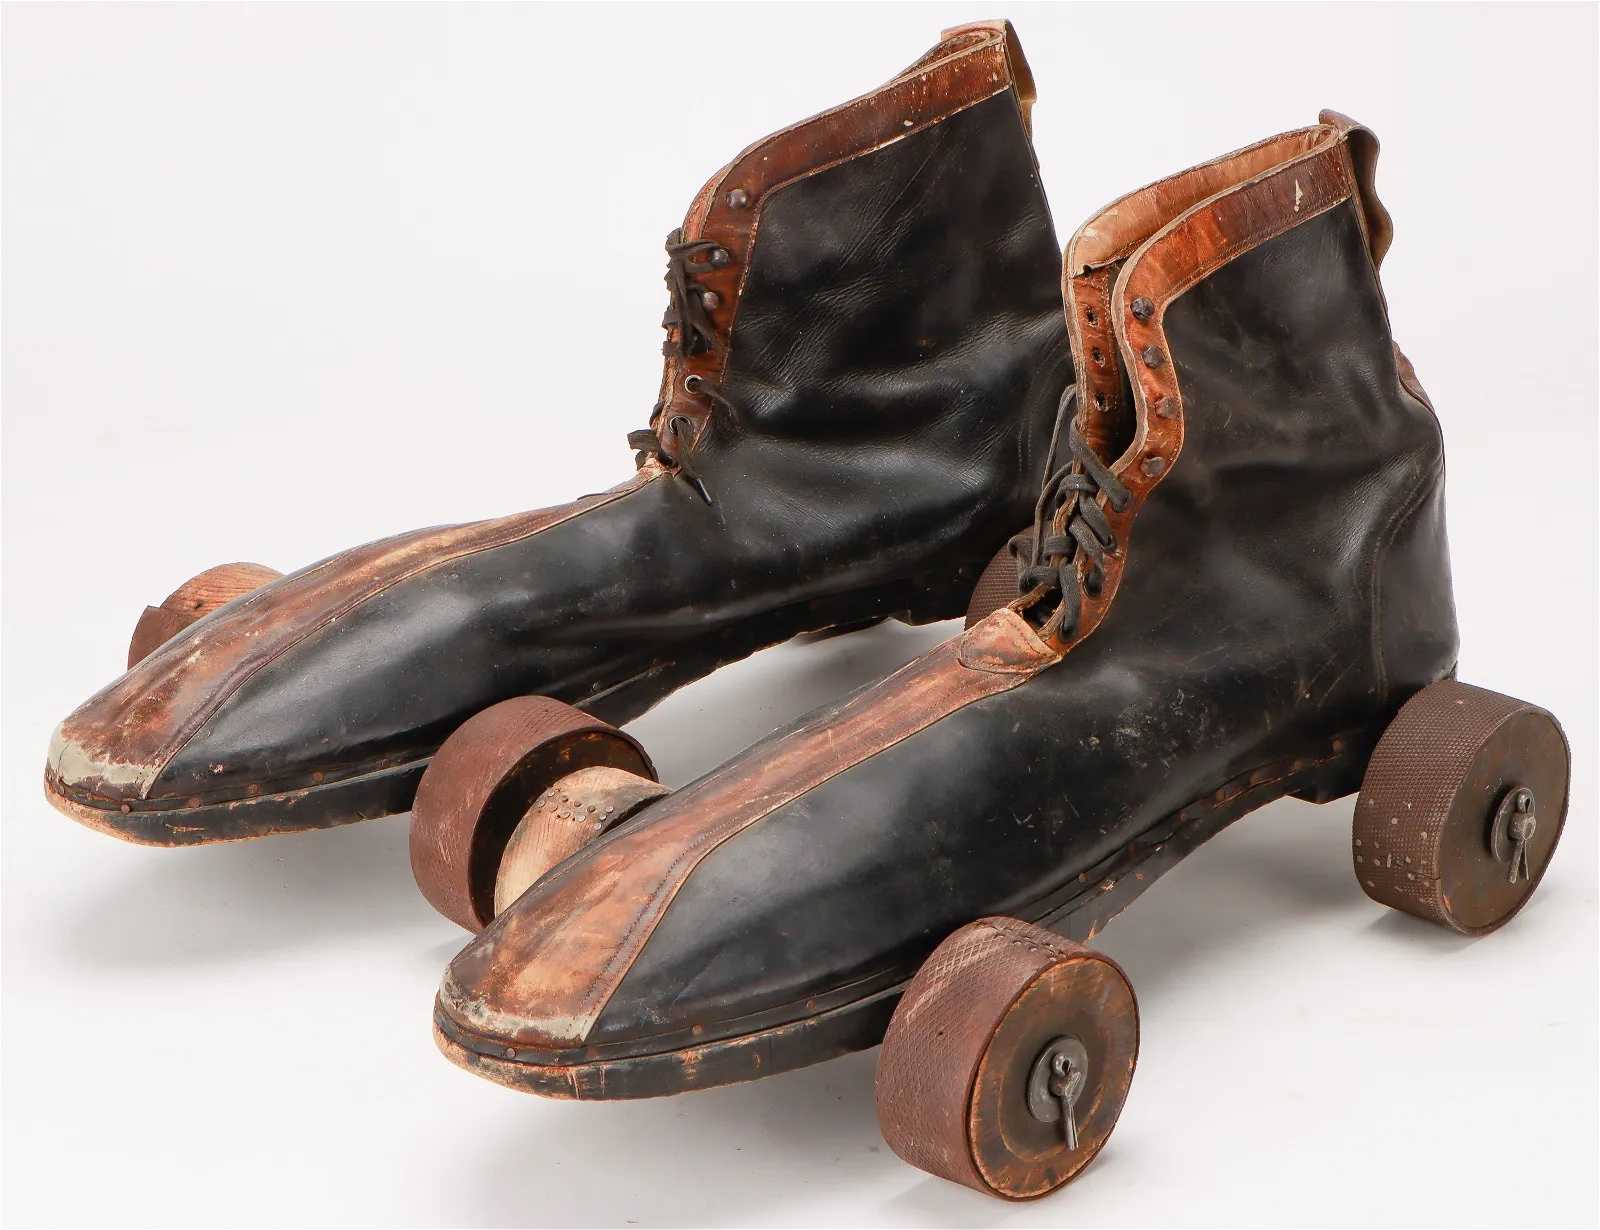 Clown-worn roller skates from the 1930s, estimated at $750-$1,000 at Material Culture on April 16.